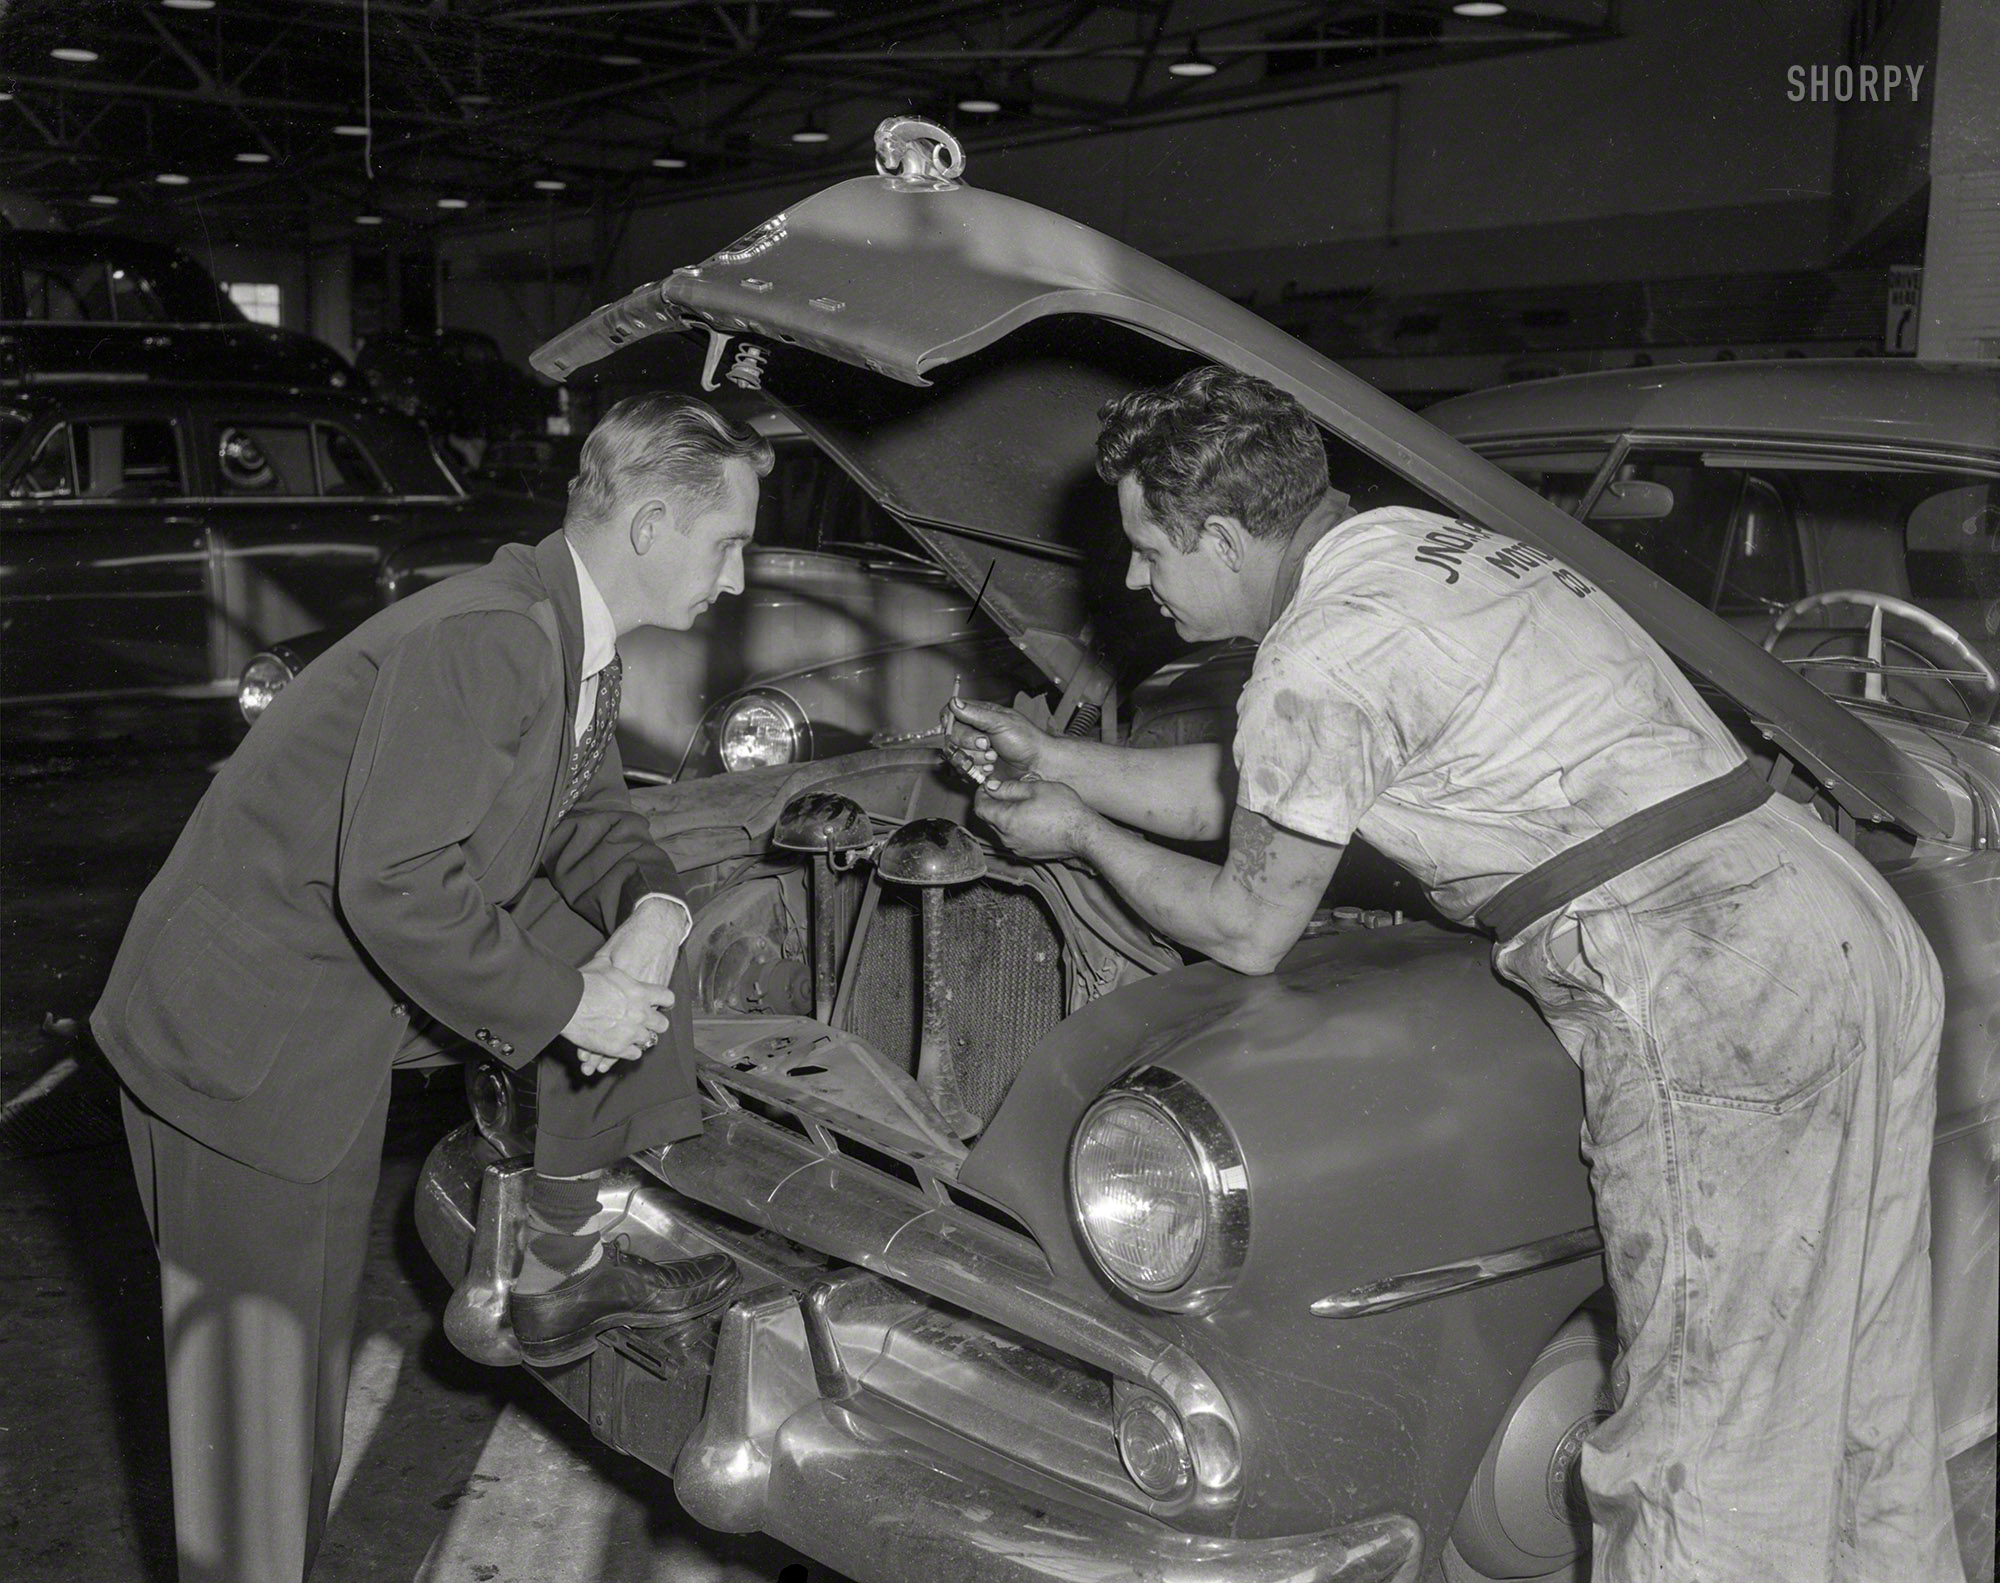 &nbsp; &nbsp; &nbsp; &nbsp; "So as you can see, Mr. Smith, pencils and spark plugs are not interchangeable."
Columbus, Georgia, circa 1952. "Pope Motor Co. service garage." 4x5 inch acetate negative from the Shorpy News Photo Archive. View full size.